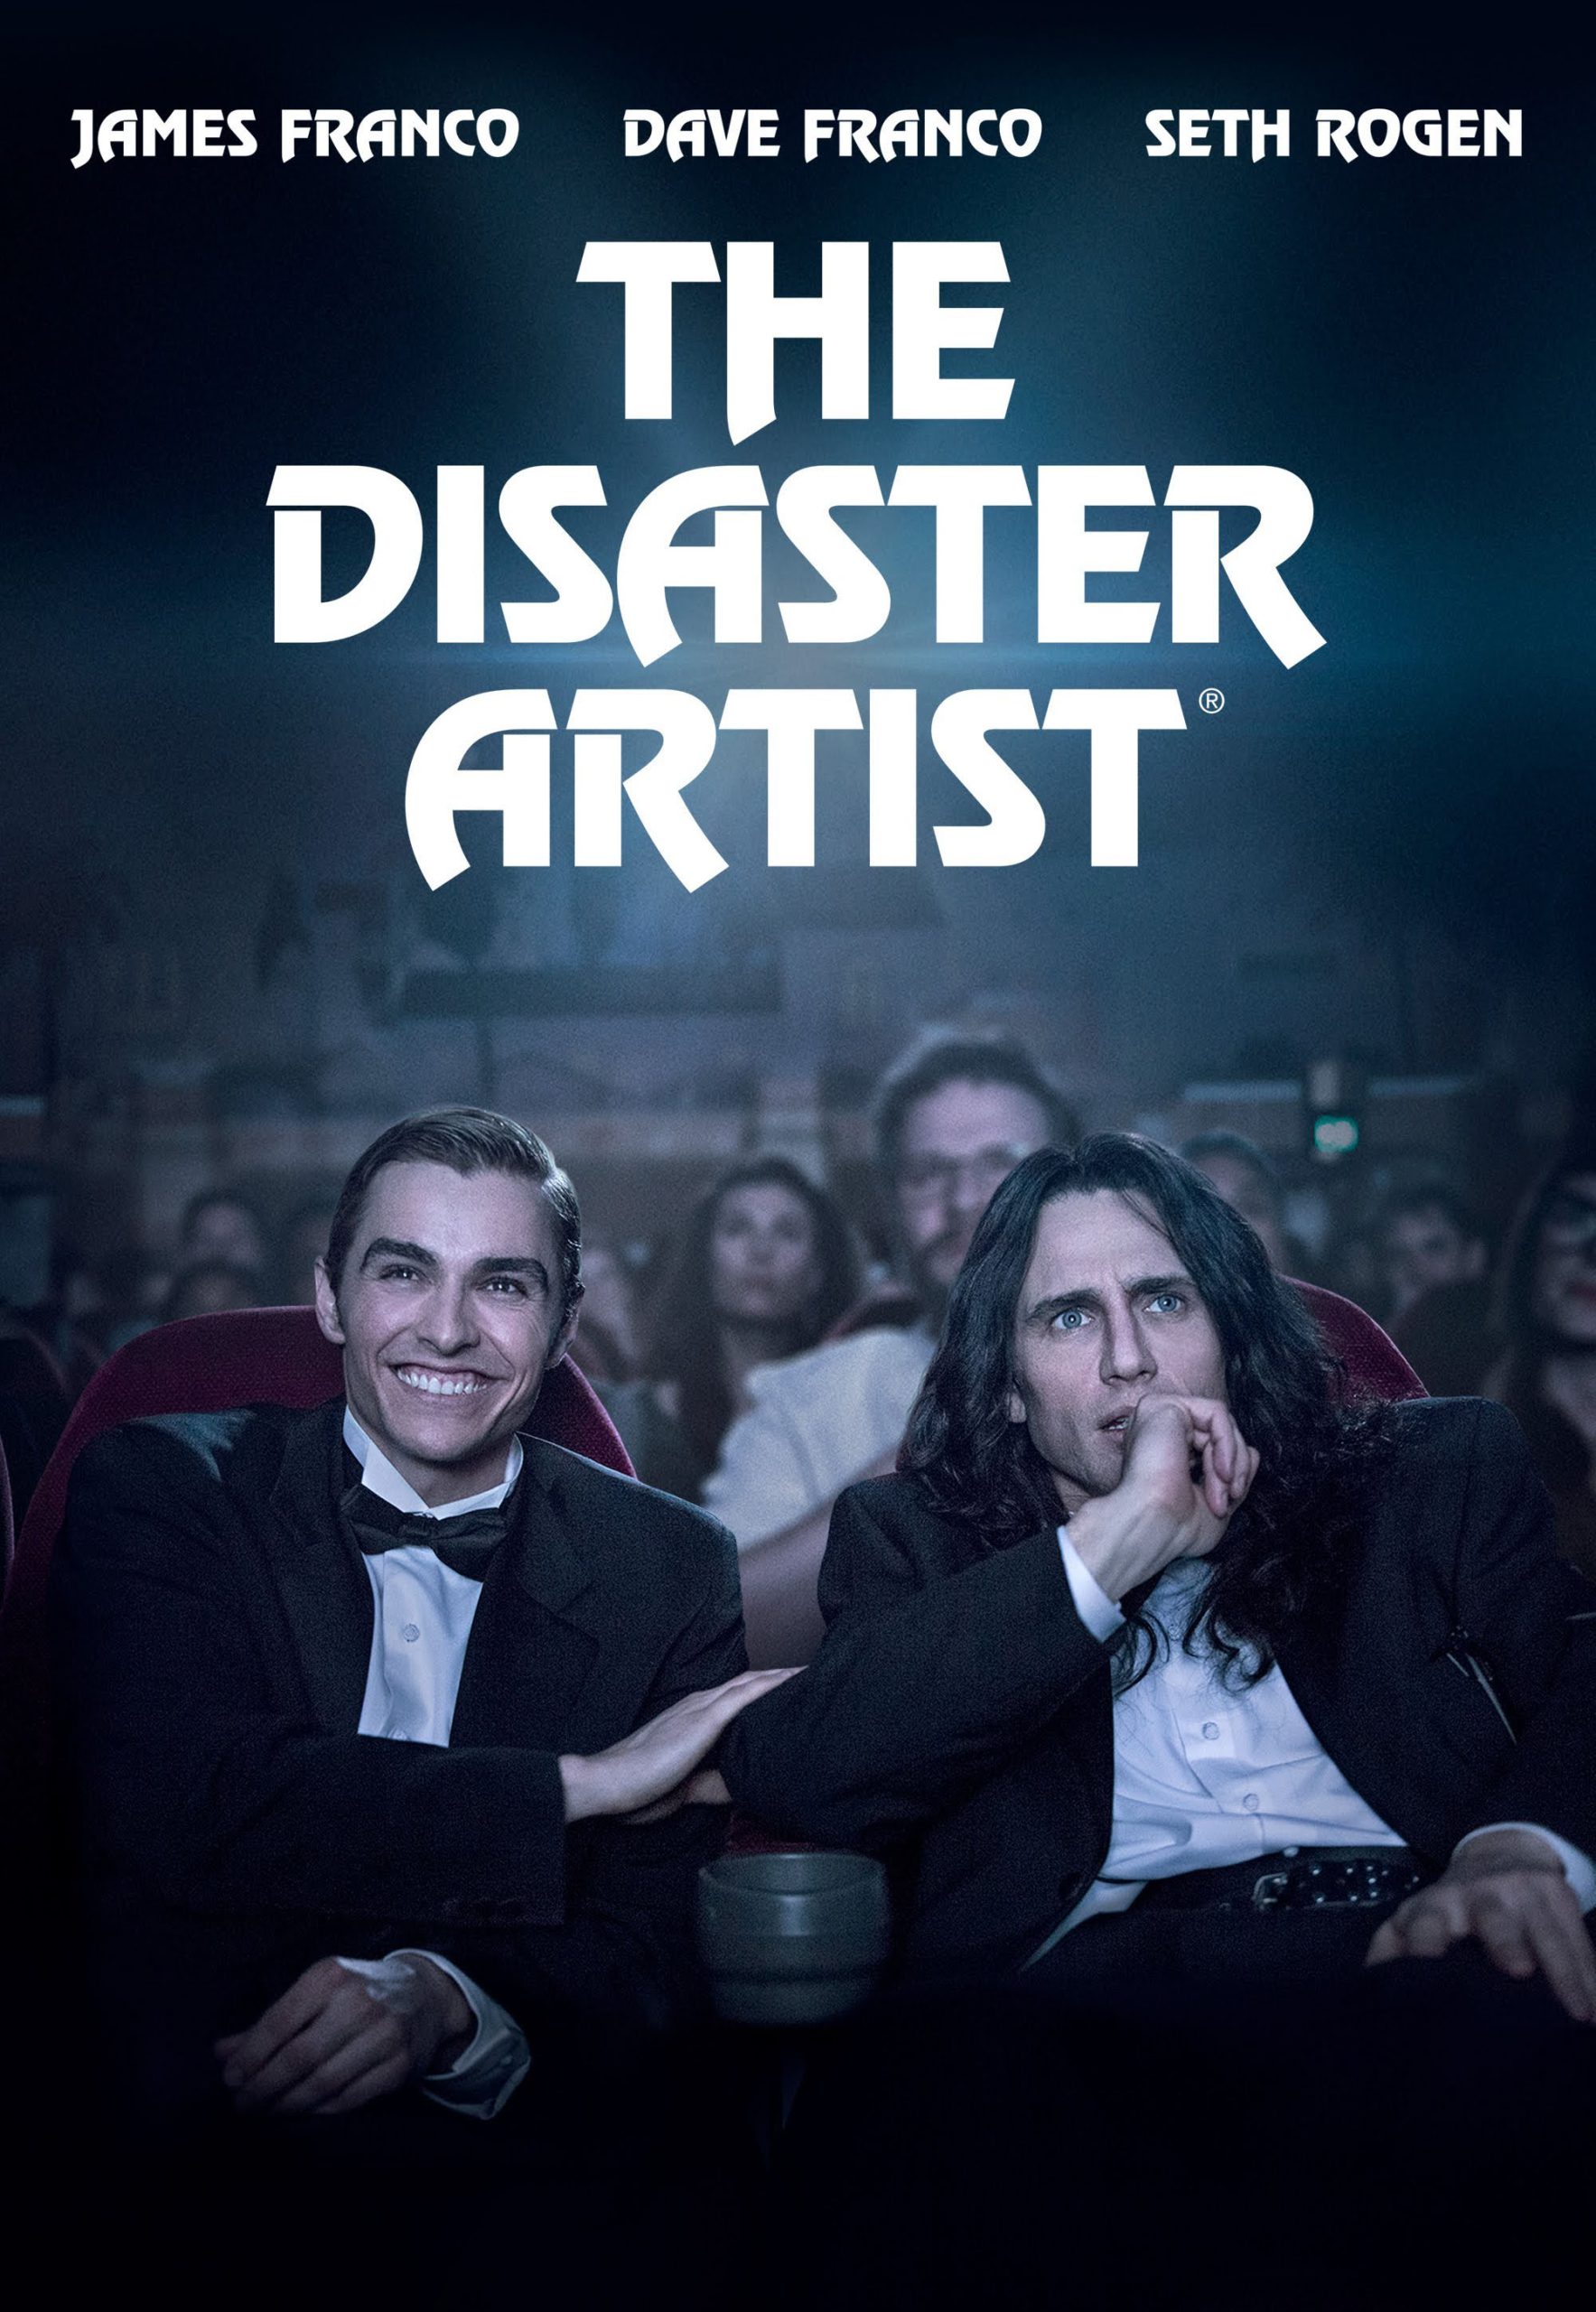 The Disaster Artist [HD] (2018)